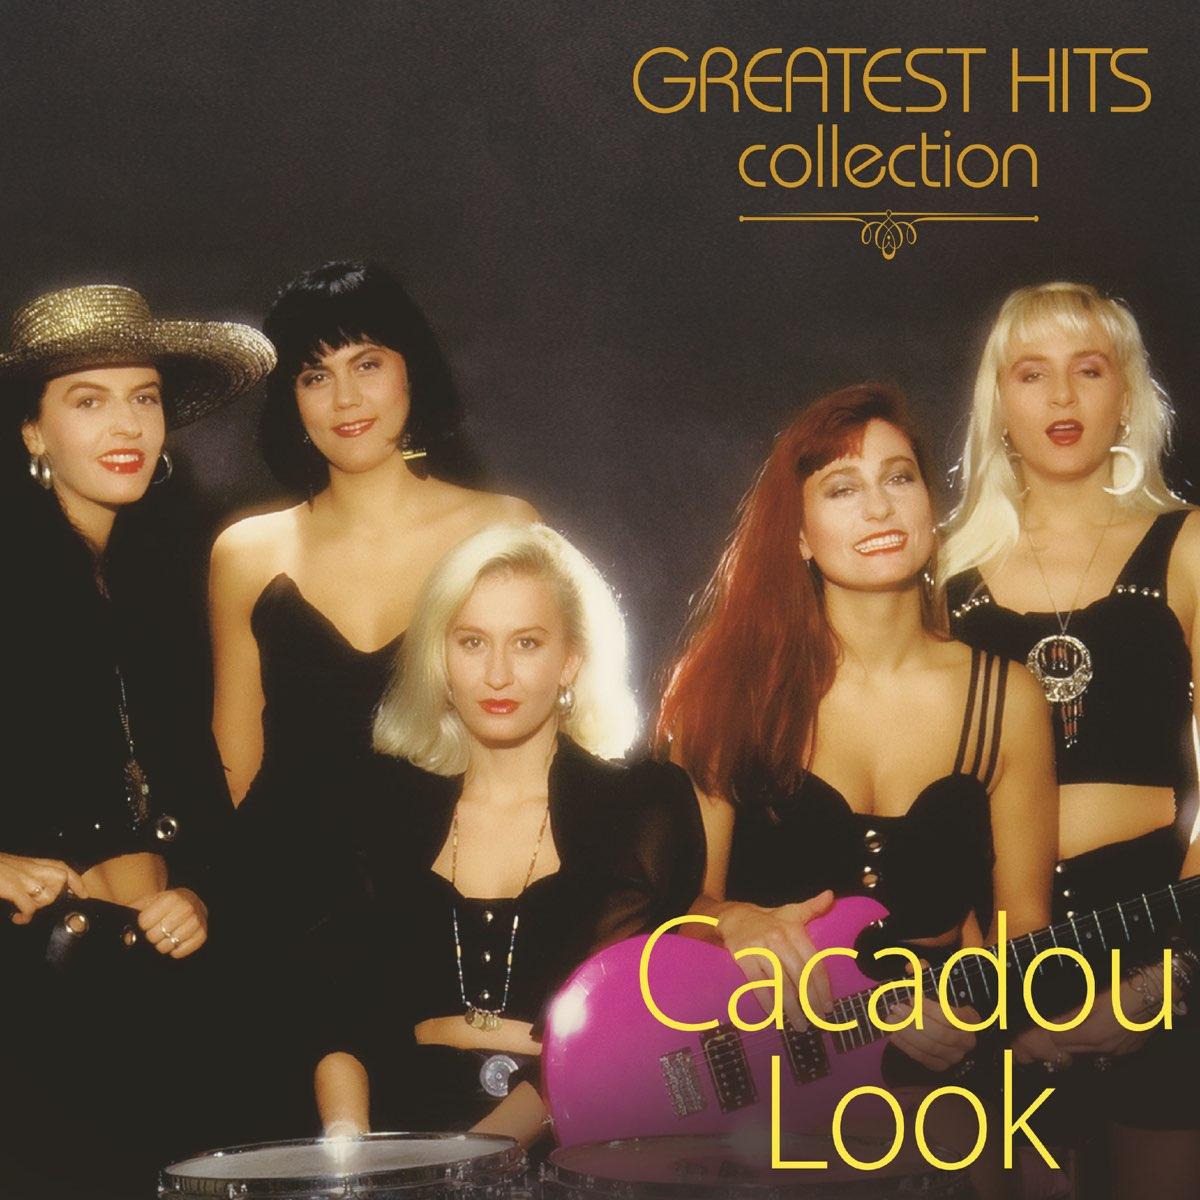 CACADOU LOOK - Greatest Hits Collection